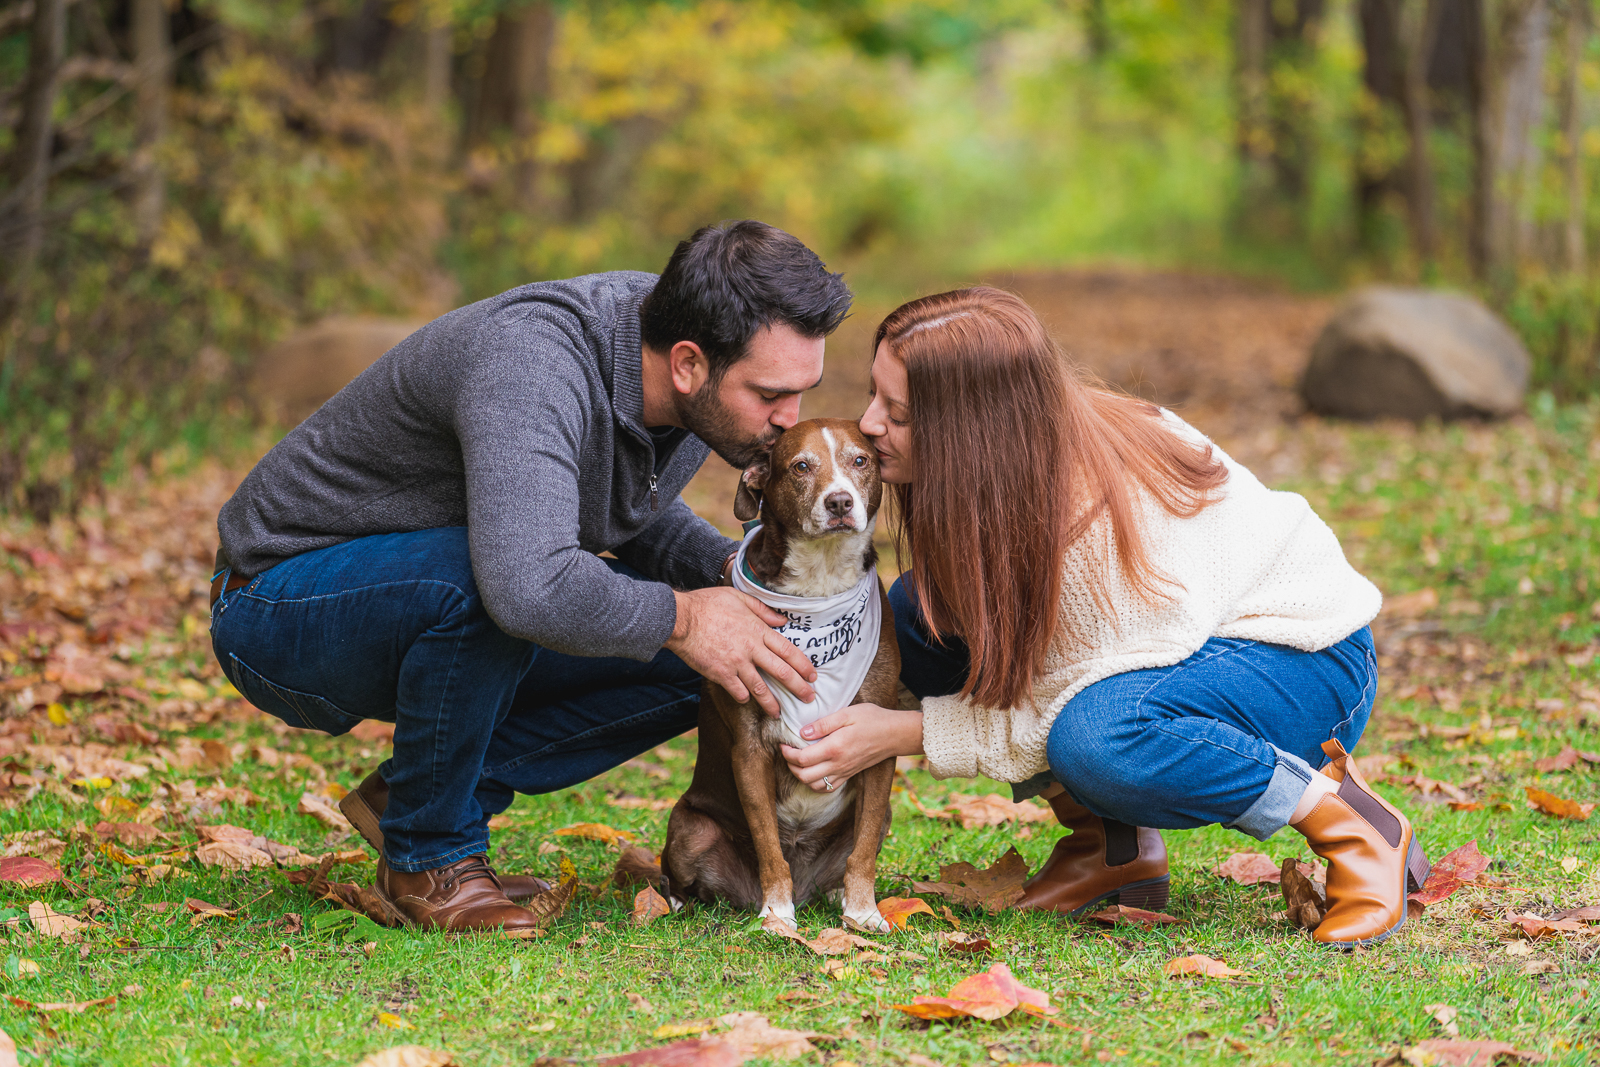 Man and woman fiancee engagement photo with dog, kiss, cute dog, dog bandana, outdoor, nature, forest, fall leaves, fall colors, outdoor fall engagement photo session at Tinkers Creek, Bedford Reservation, Cleveland Metroparks